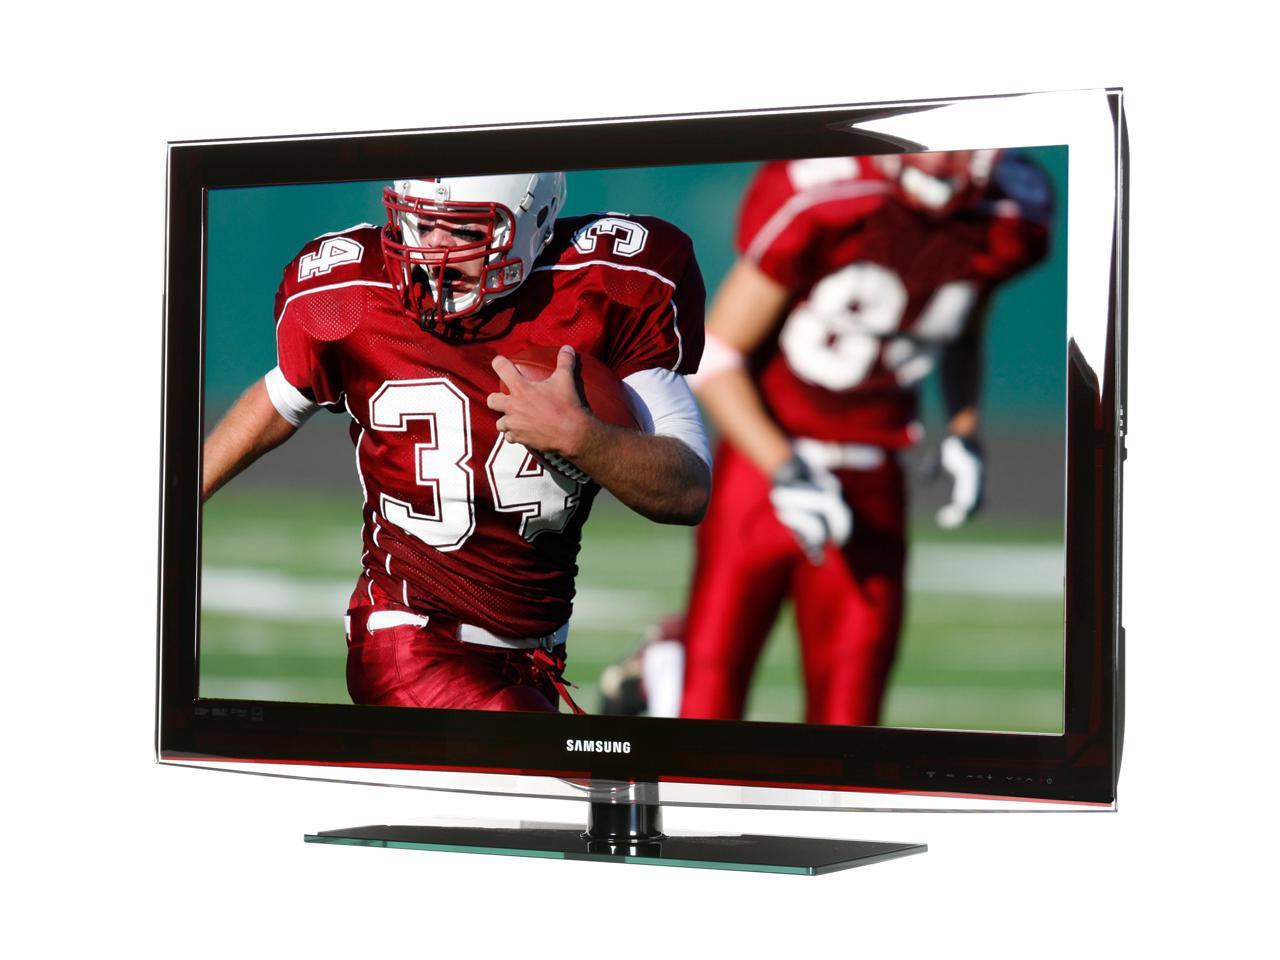 Samsung 40" 1080p LCD HDTV w/ Touch of Color Design - - Newegg.com